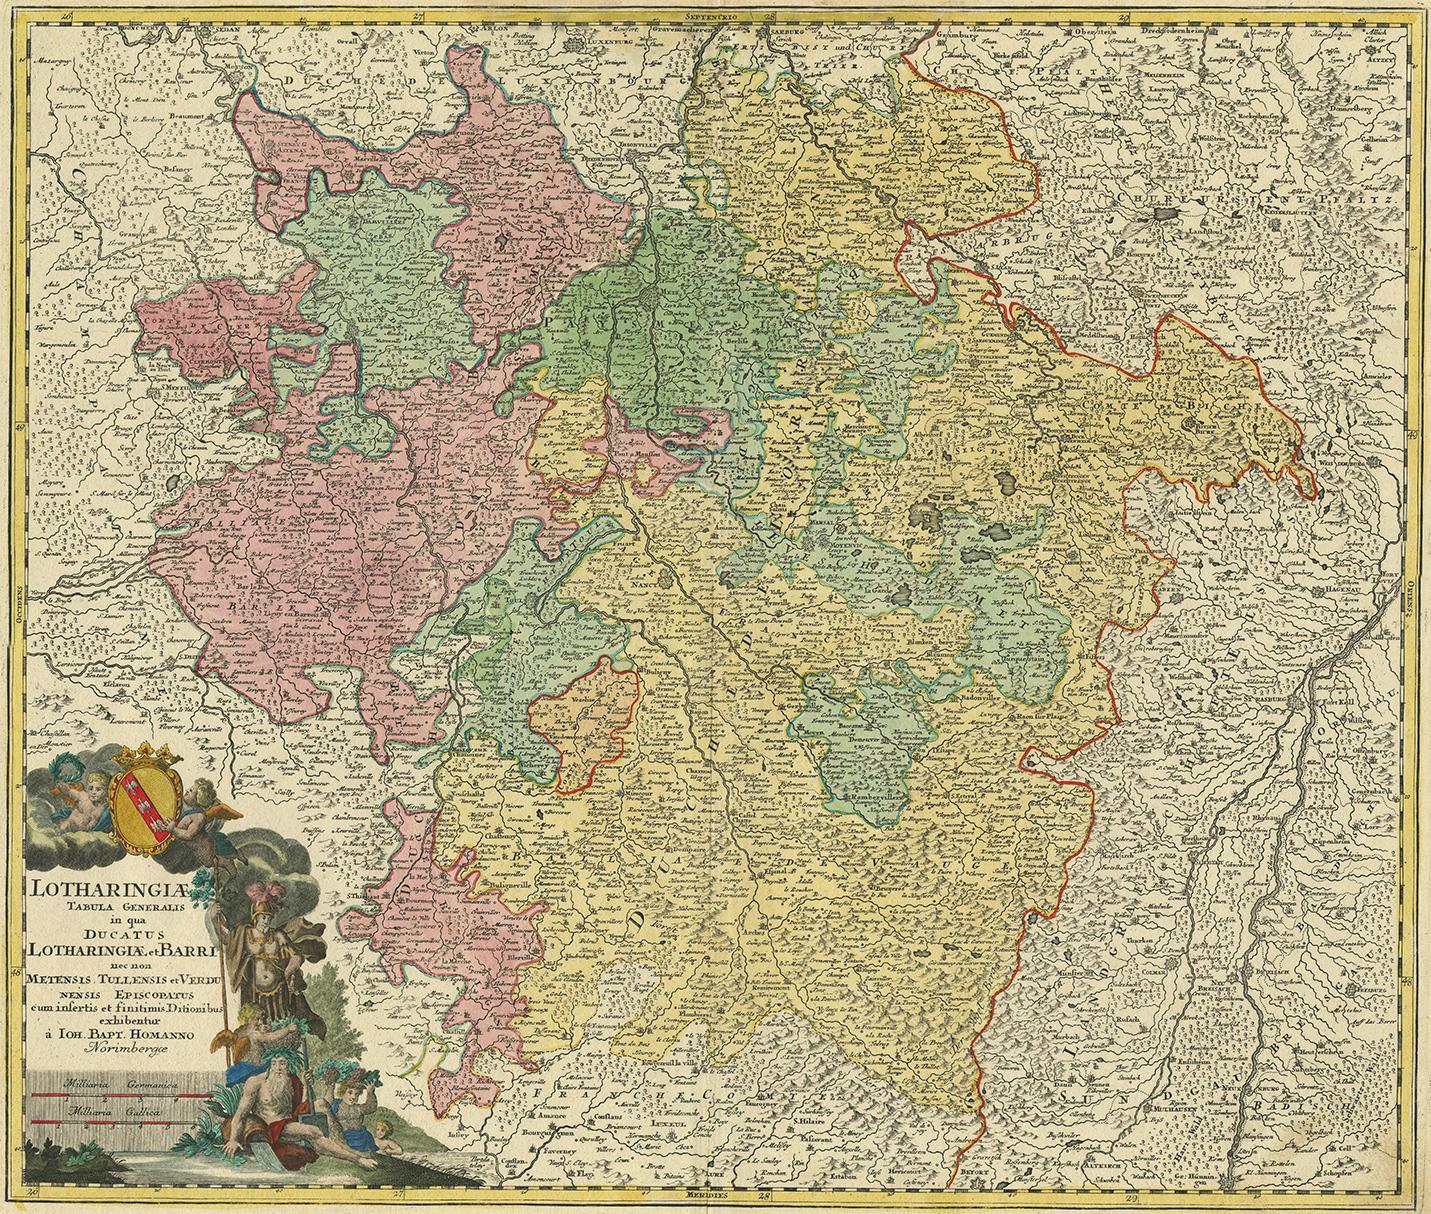 Antique map of Lorraine in north-east France by J. B. Homann. Covering the area around Metz, Nancy and Sarrebruck with Luxembourg in the North and Mulhouse in Southeast. With a decorative figurative and allegoric cartouche.